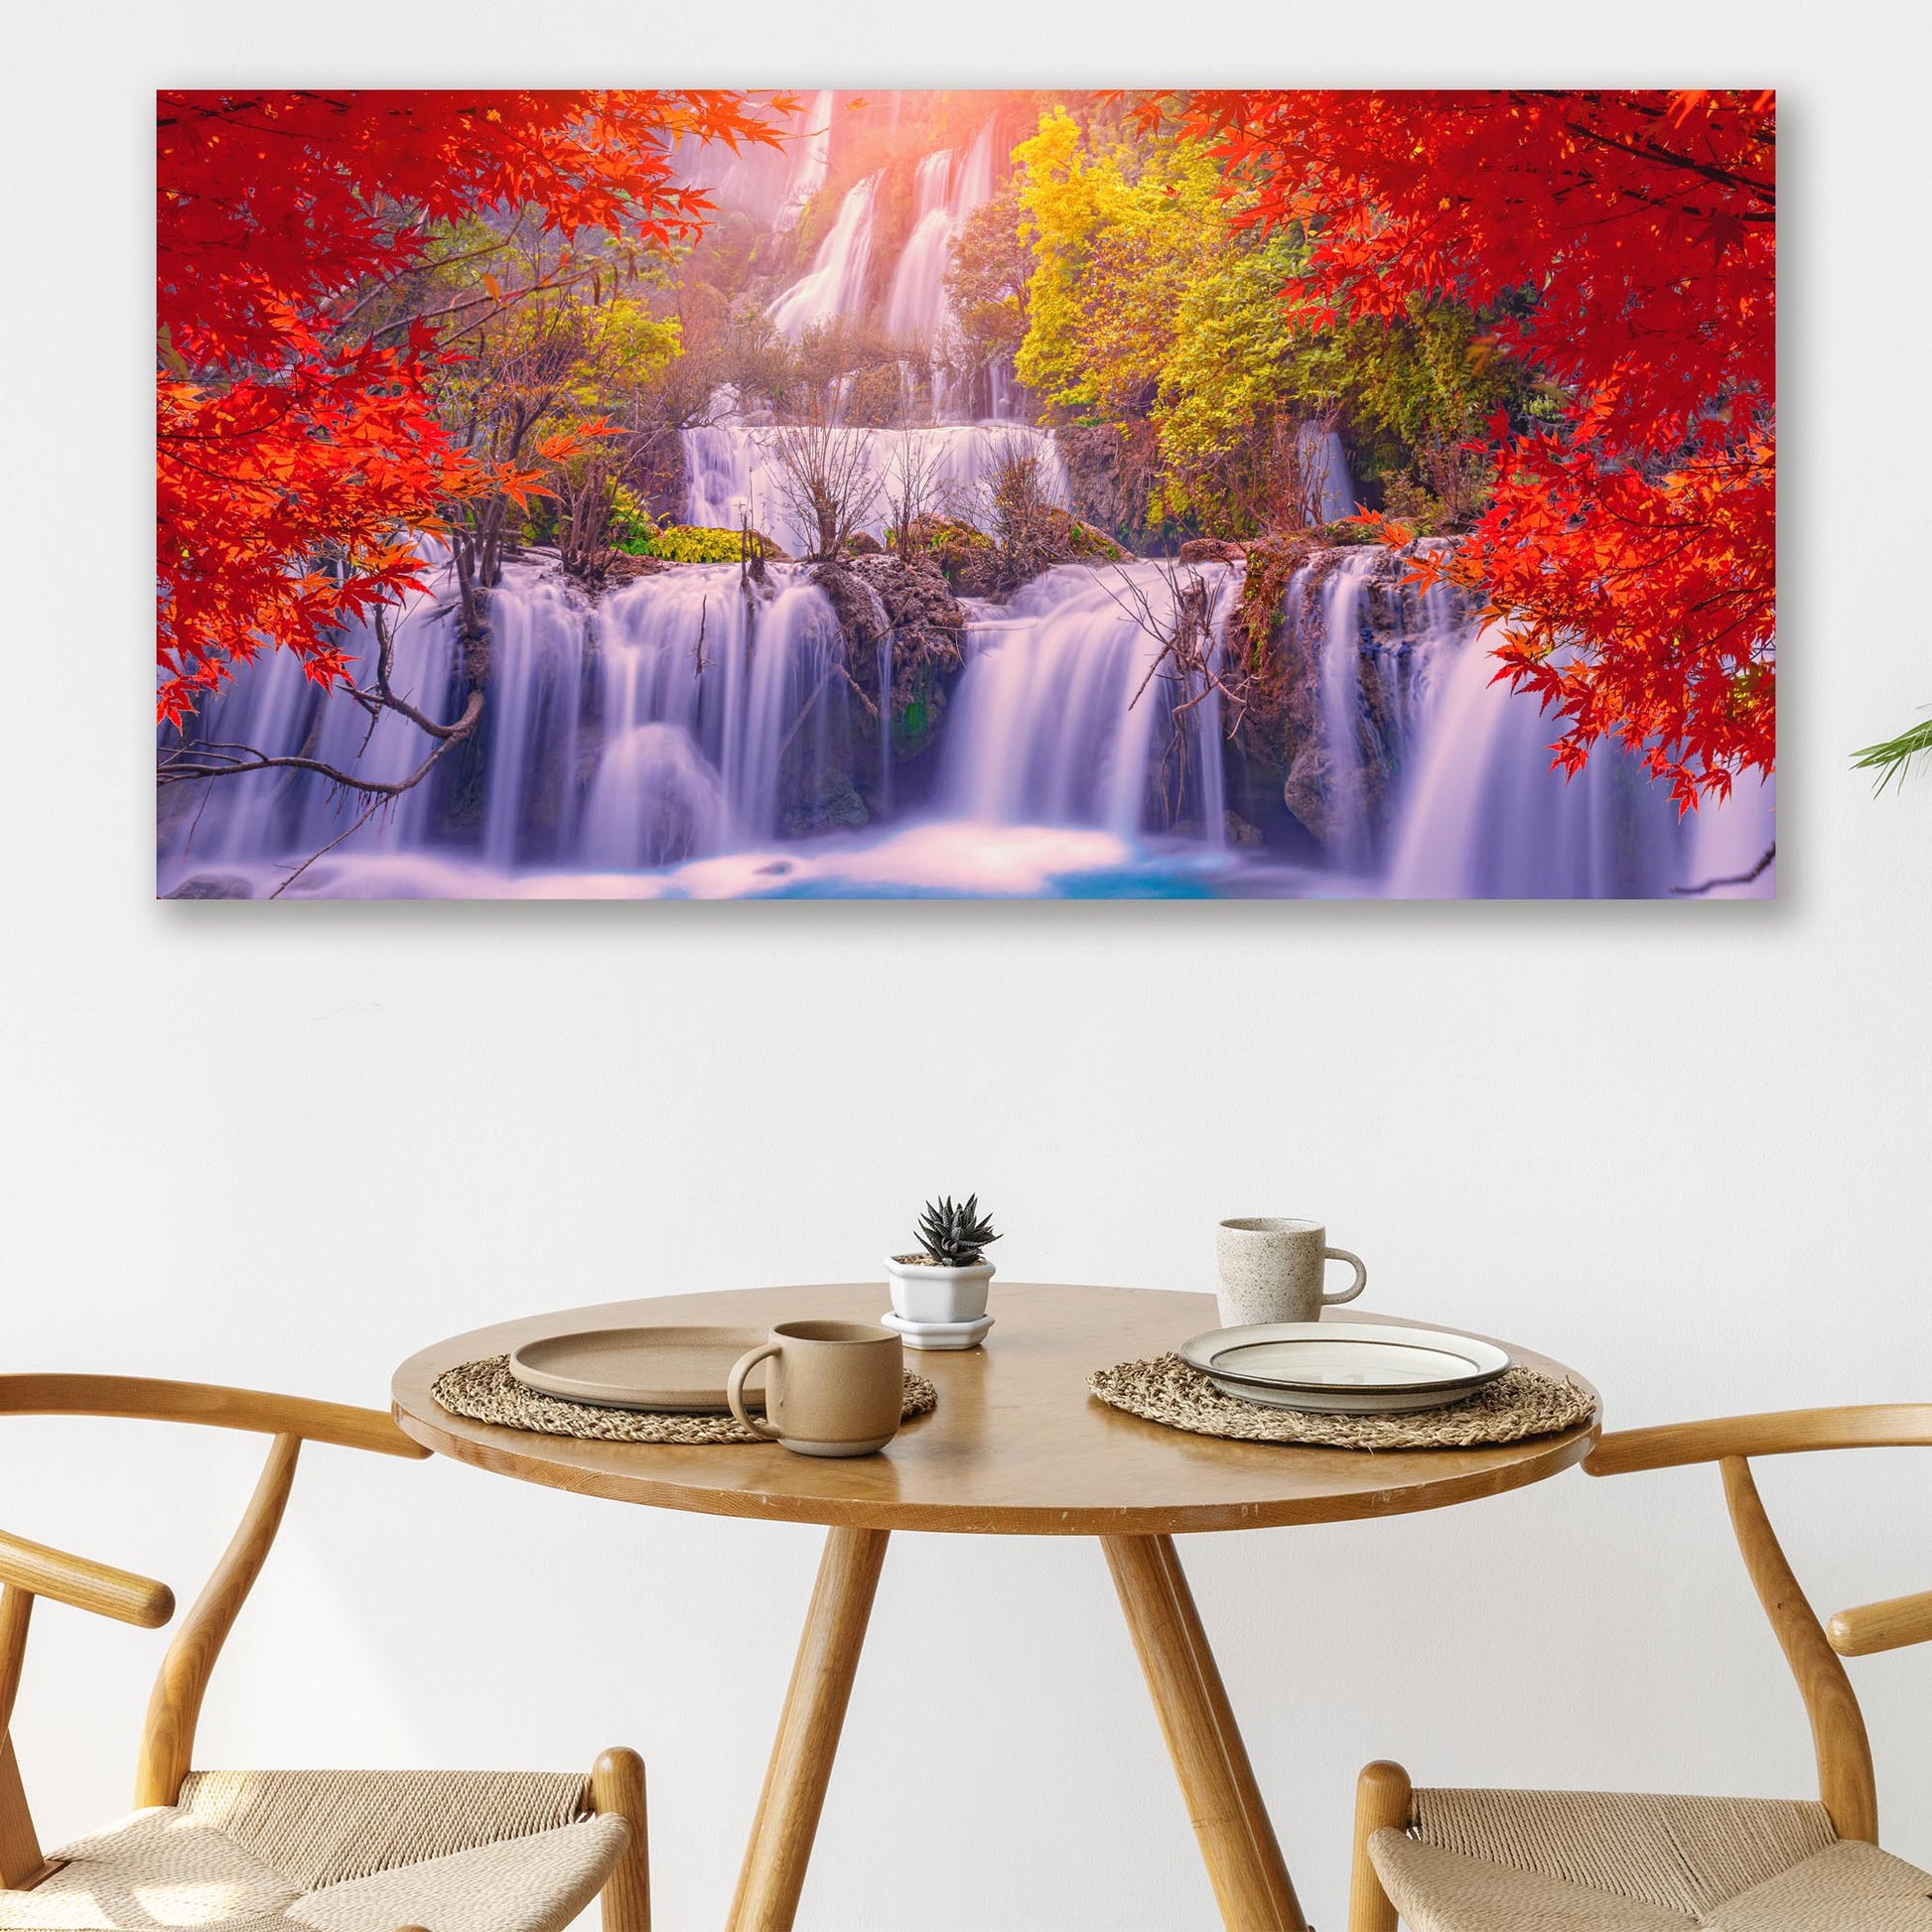 Autumn Waterfalls Canvas Wall Art Style 2 - Image by Tailored Canvases